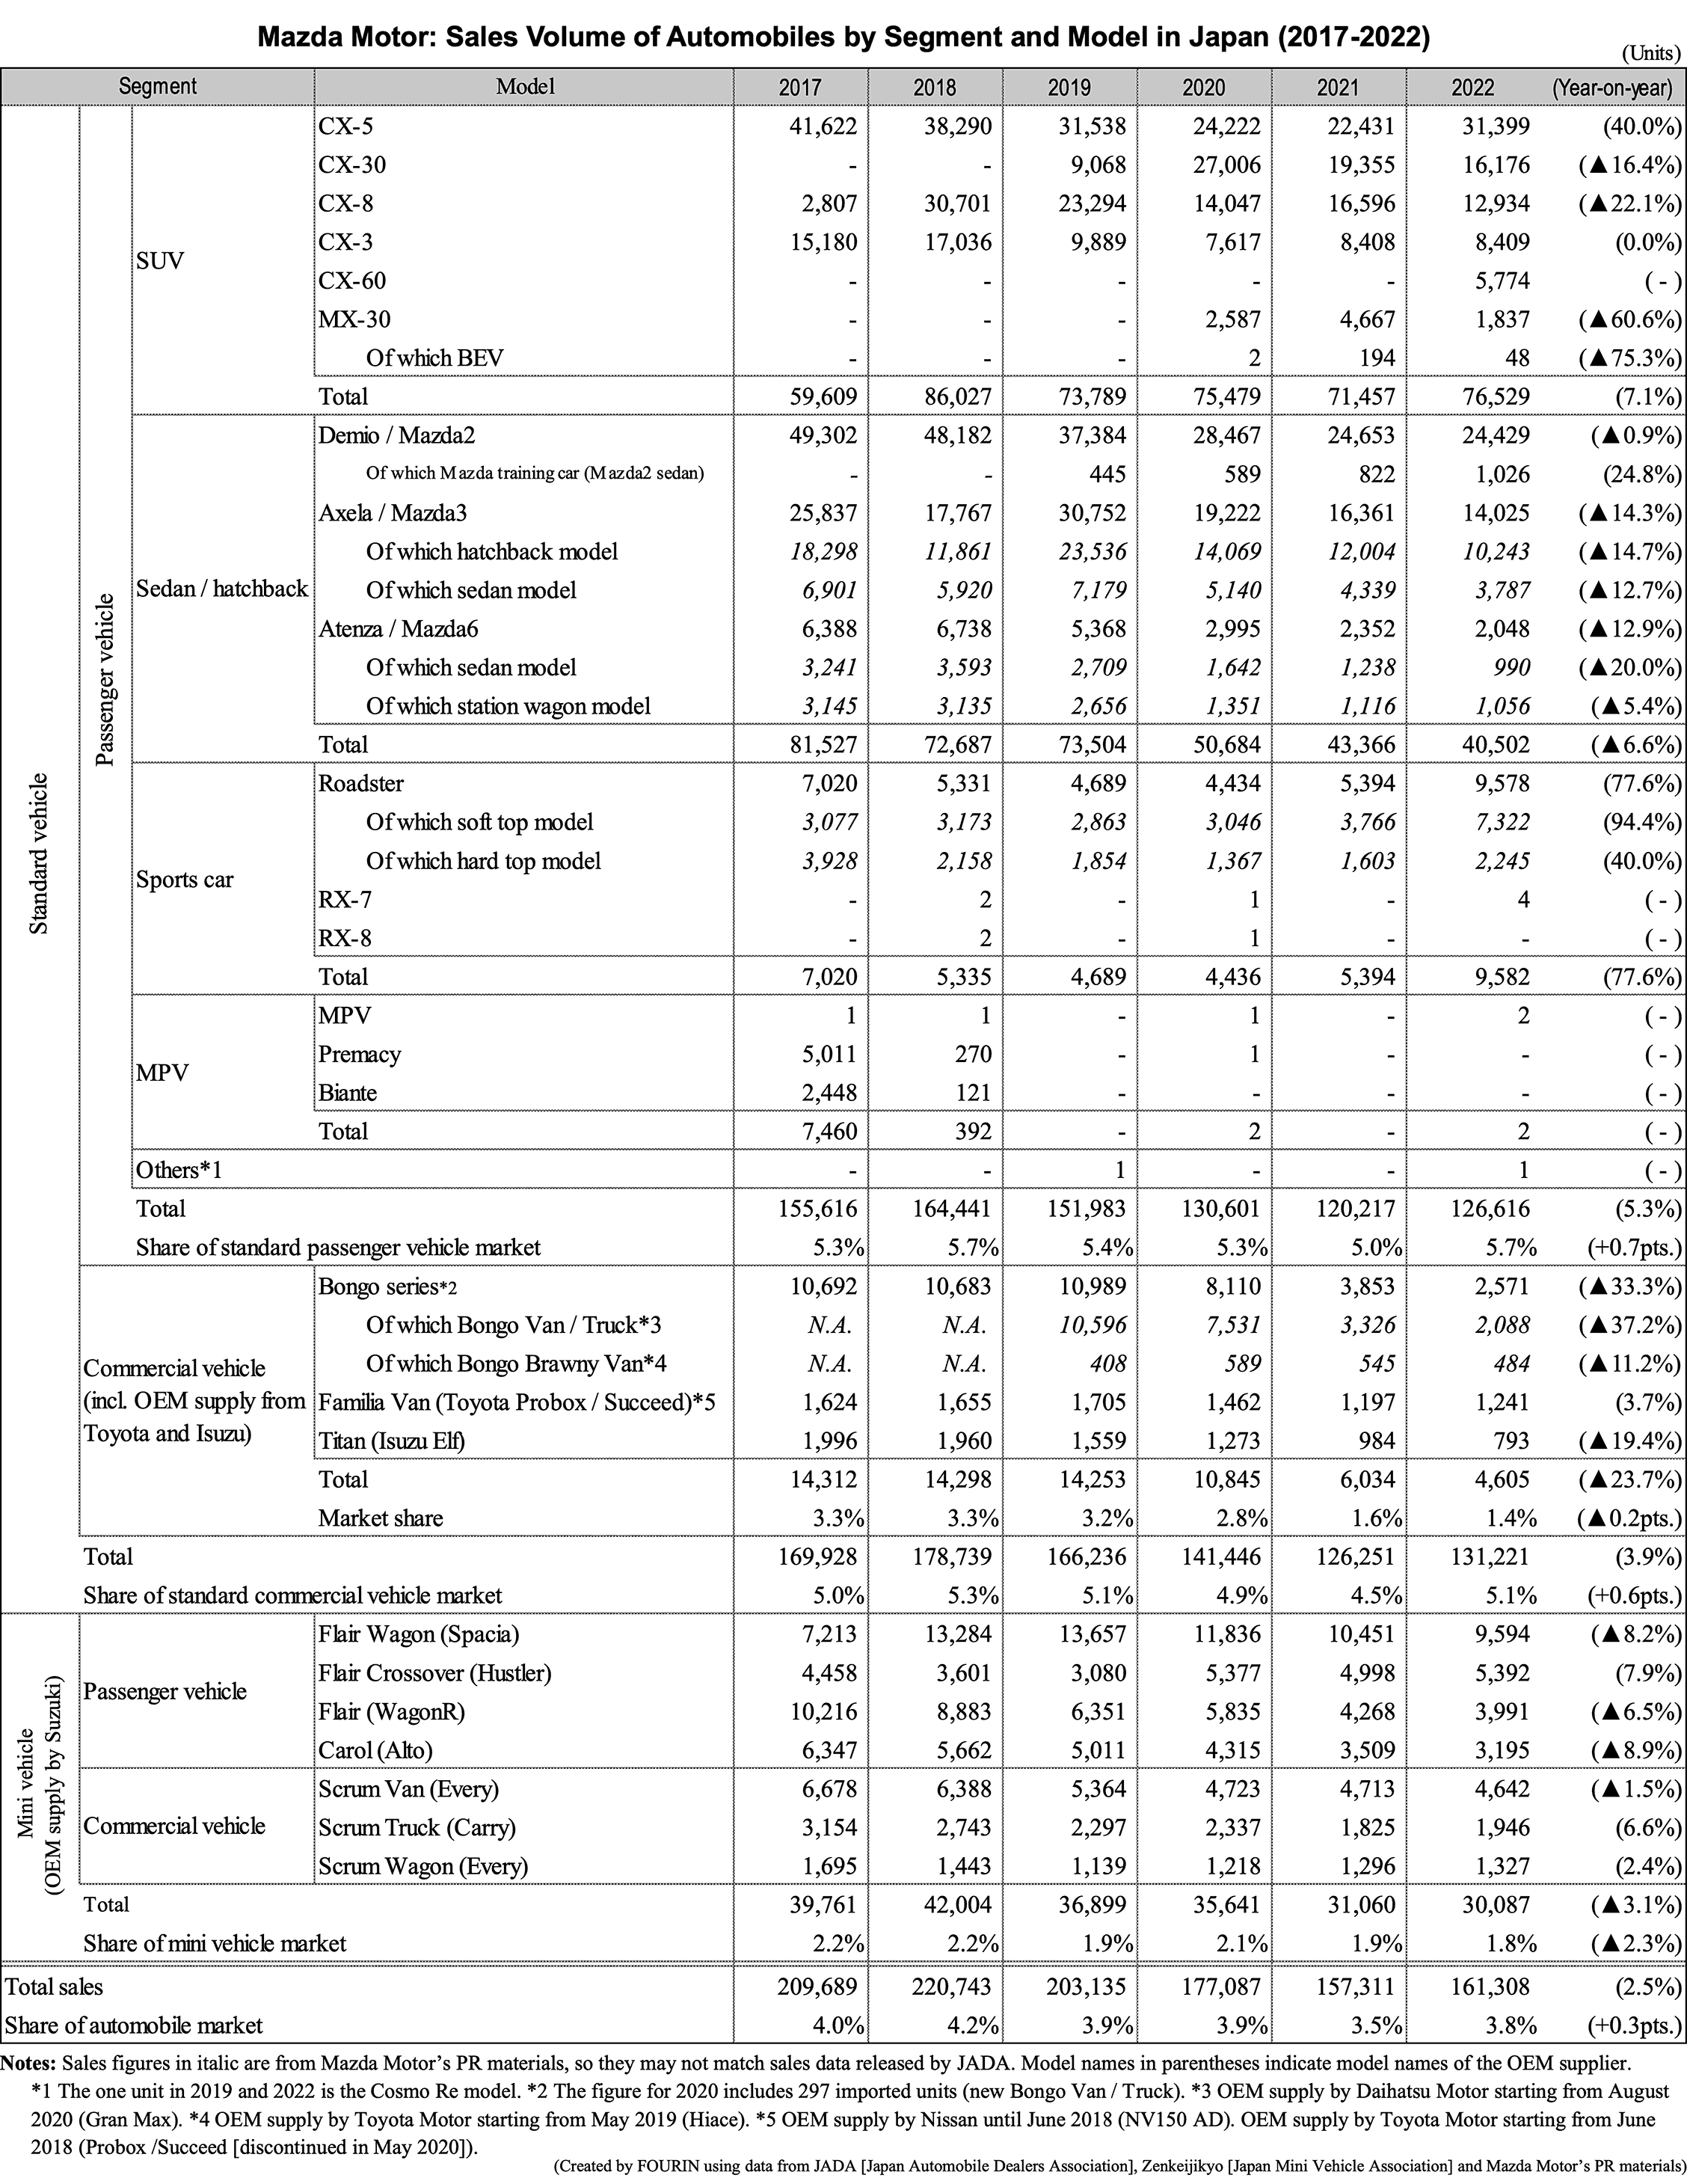 Table data: Mazda Motor: Sales Volume of Automobiles by Segment and Model in Japan (2017-2022)